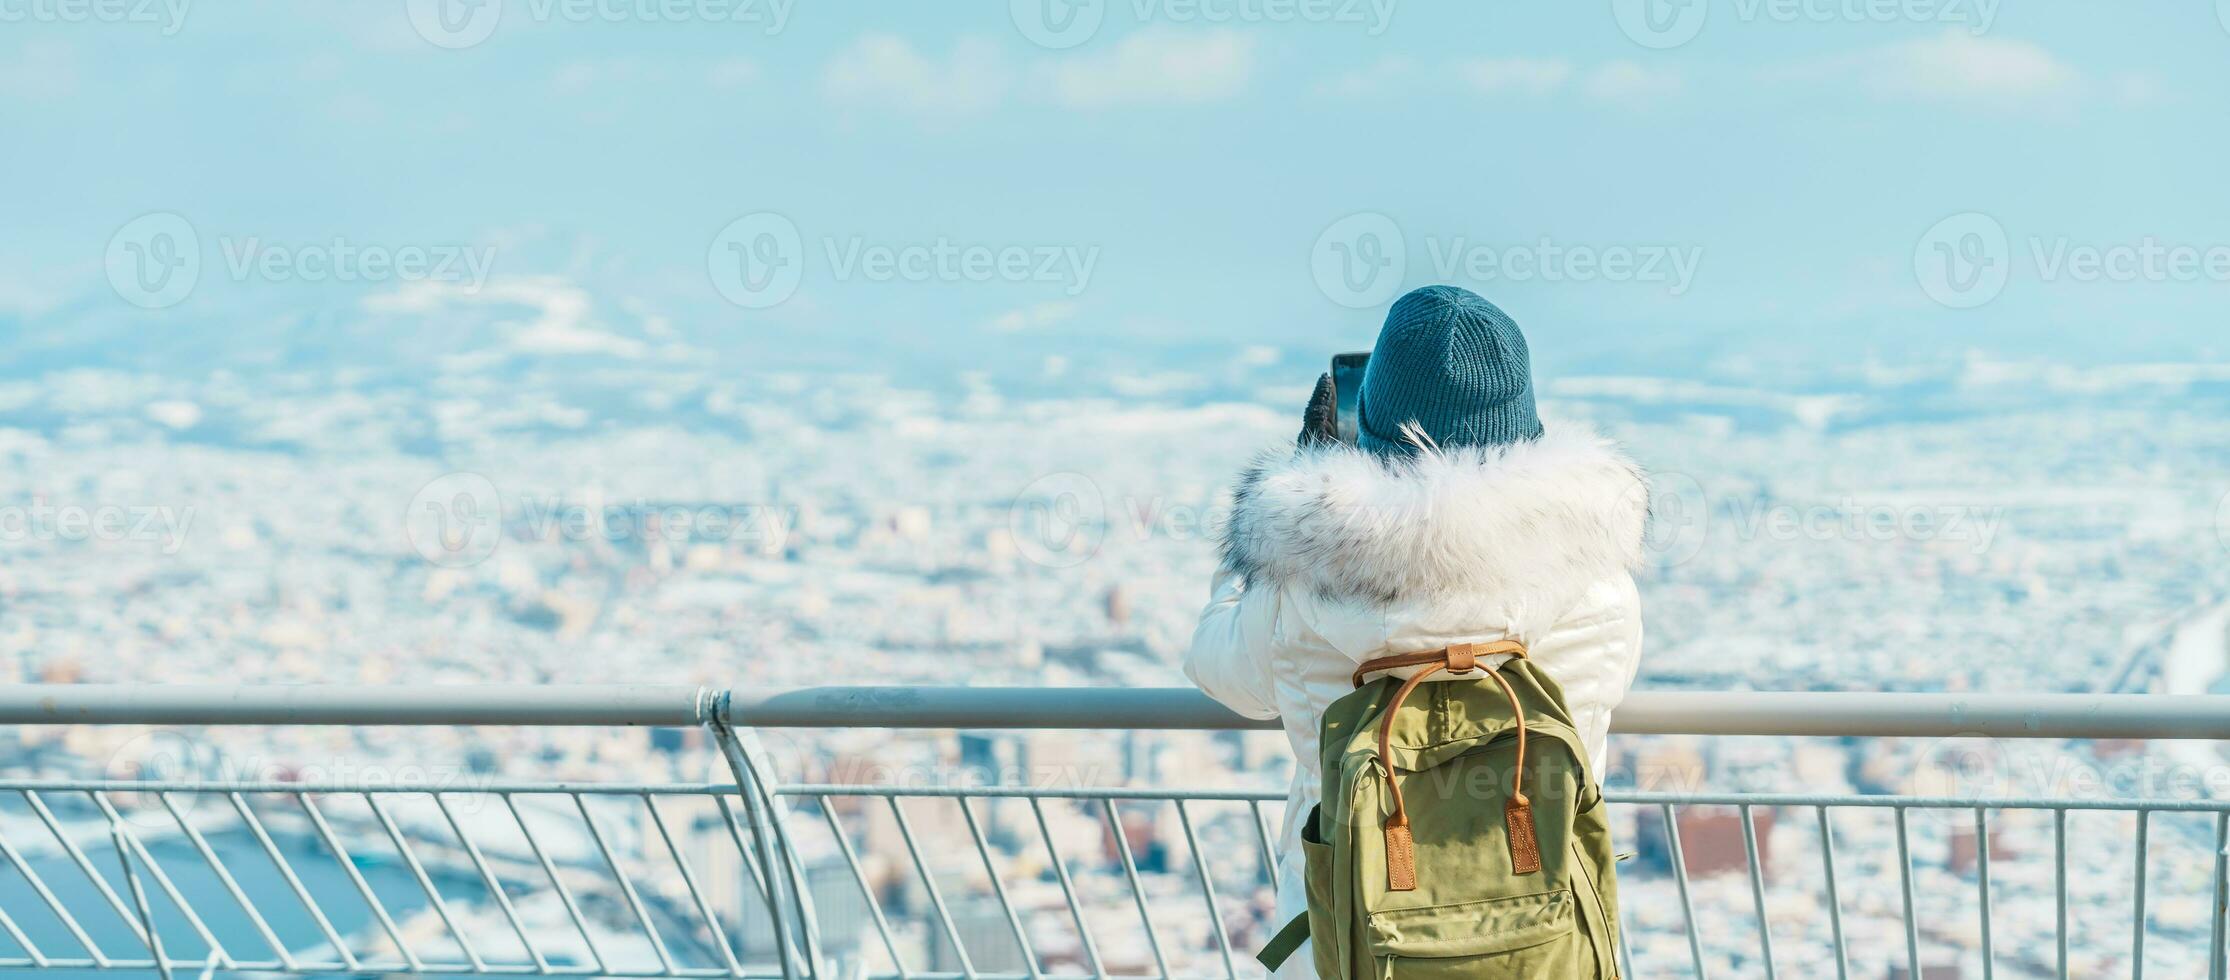 Woman tourist Visiting in Hakodate, Traveler in Sweater sightseeing view from Hakodate mountain with Snow in winter. landmark and popular for attractions in Hokkaido, Japan.Travel and Vacation concept photo